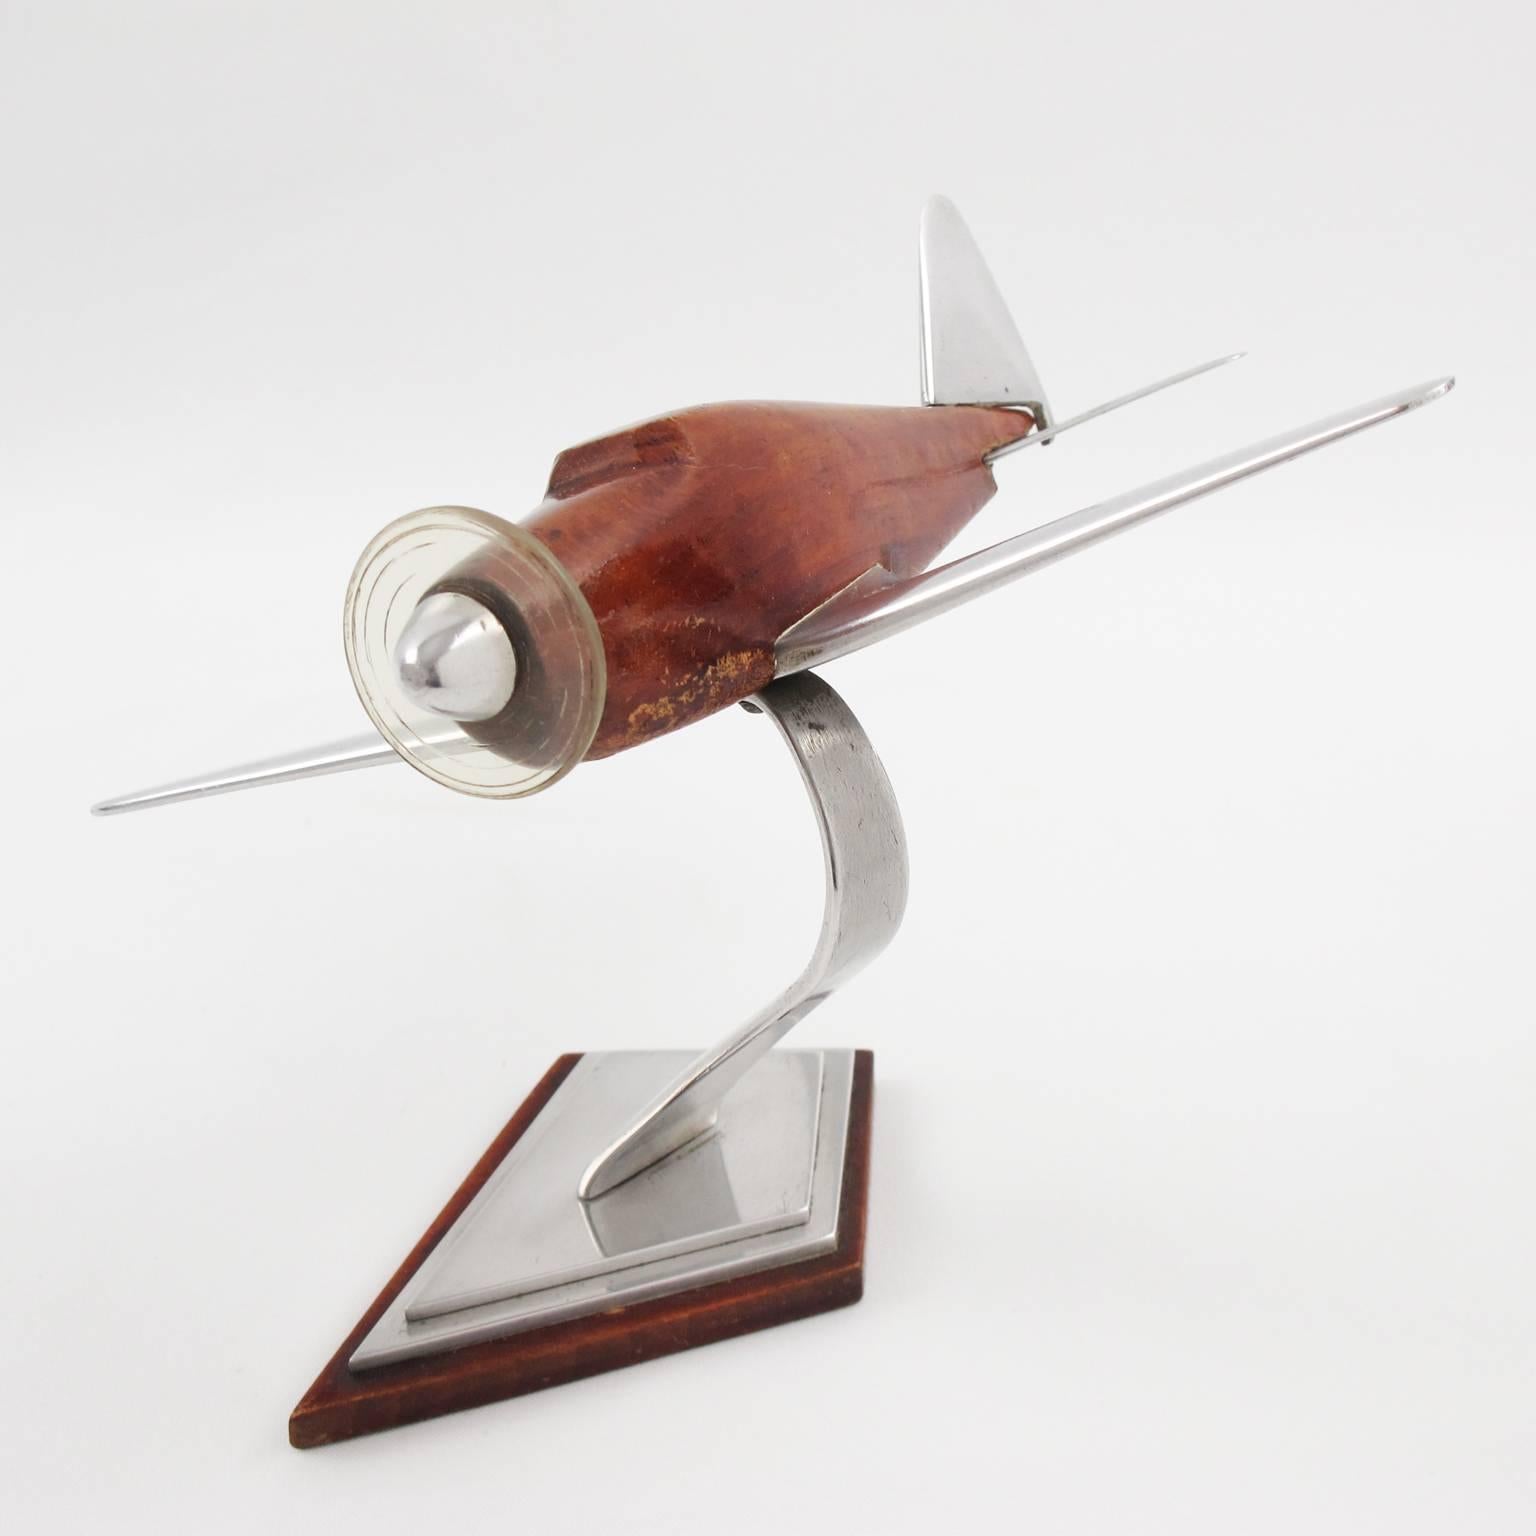 Vintage French Art Deco wood and cast aluminium airplane model, mounted on a stylized plinth. This nice Art Deco model airplane is made with solid varnish wood and cast aluminium. It has one Lucite propeller. Standing on a geometric wood and